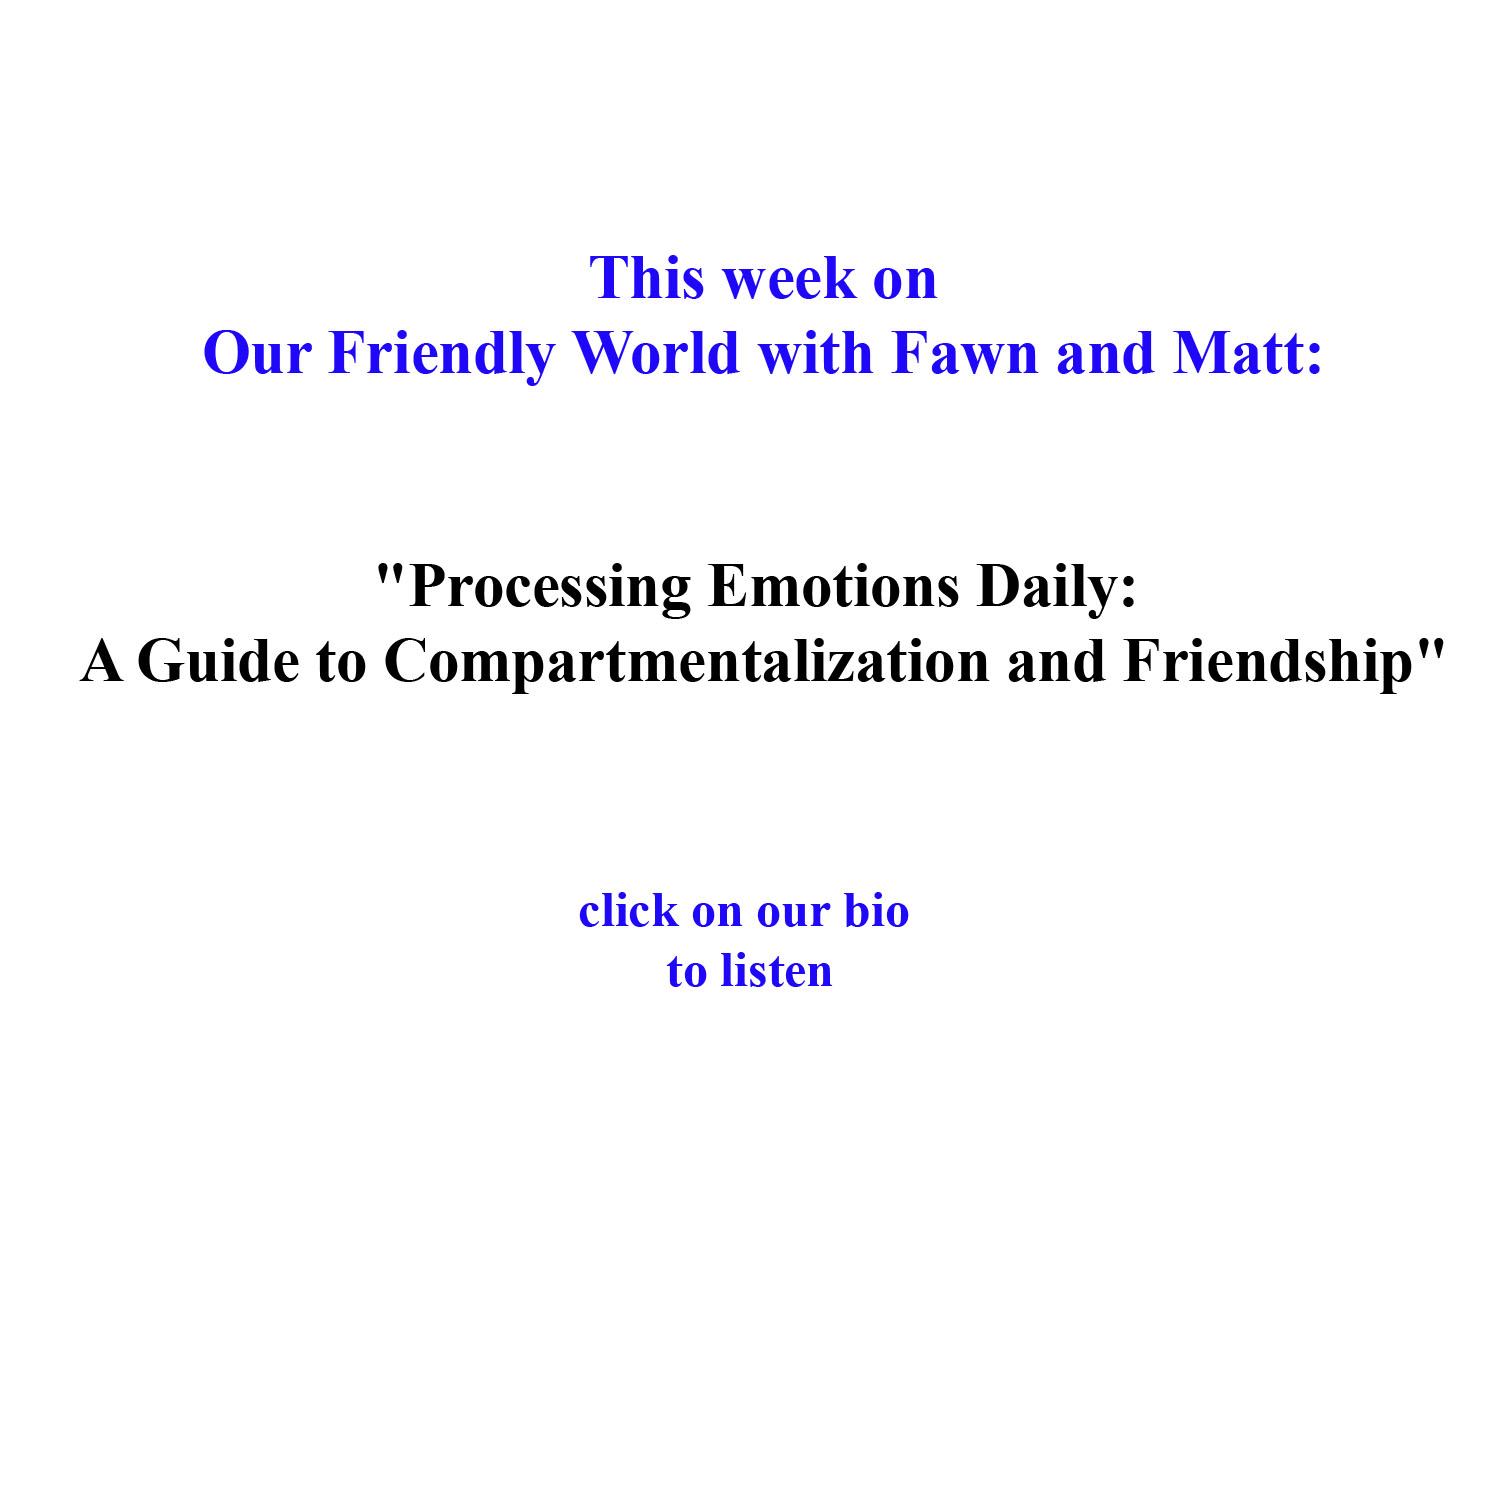 "Processing Emotions Daily: A Guide to Compartmentalization and Friendship"